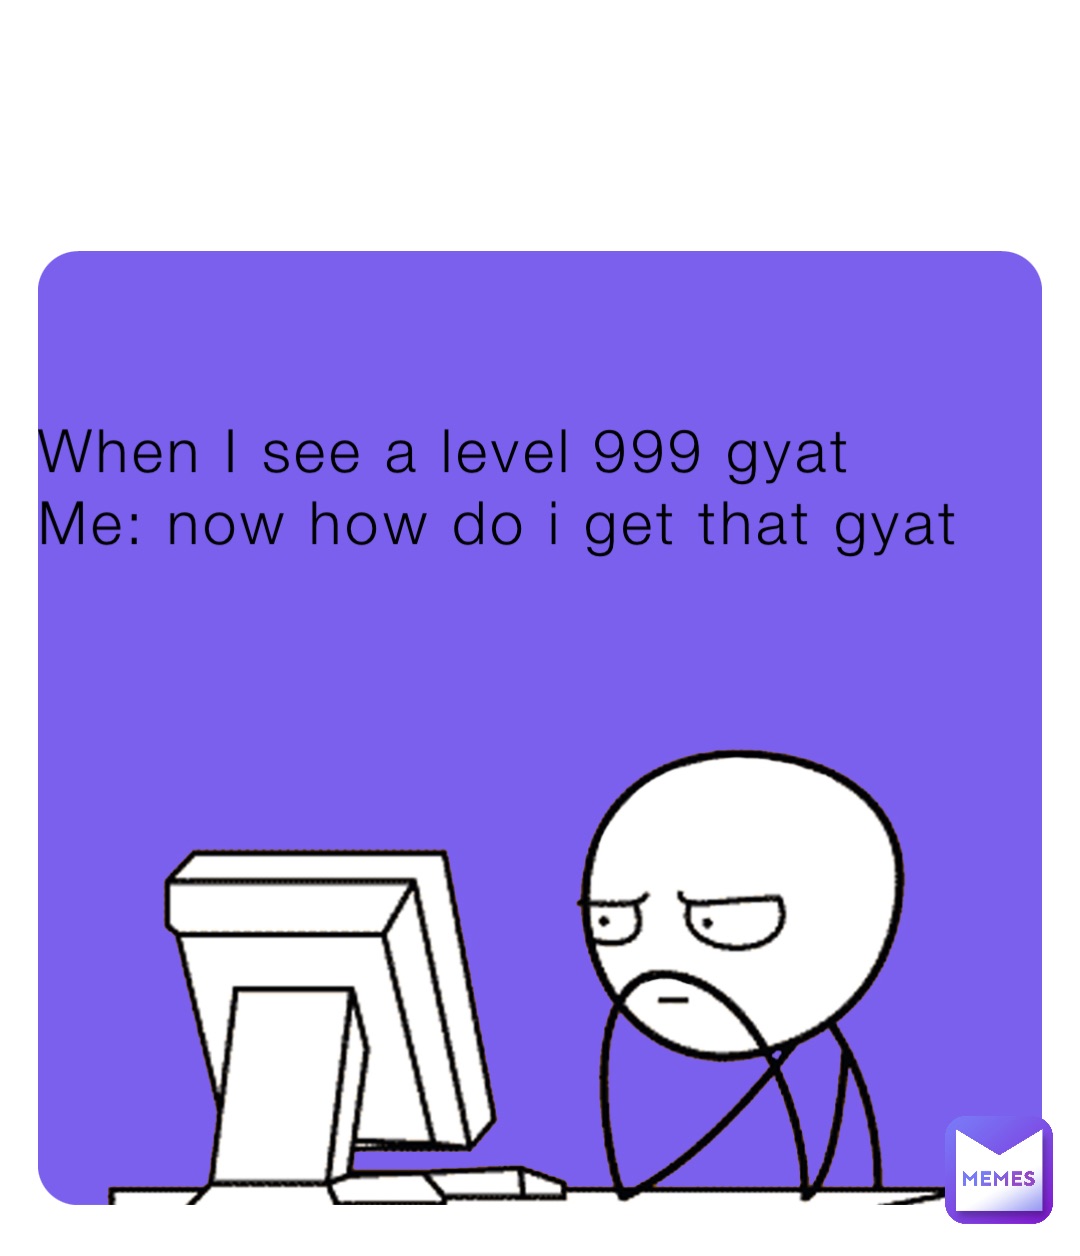 When I see a level 999 gyat 
Me: now how do i get that gyat